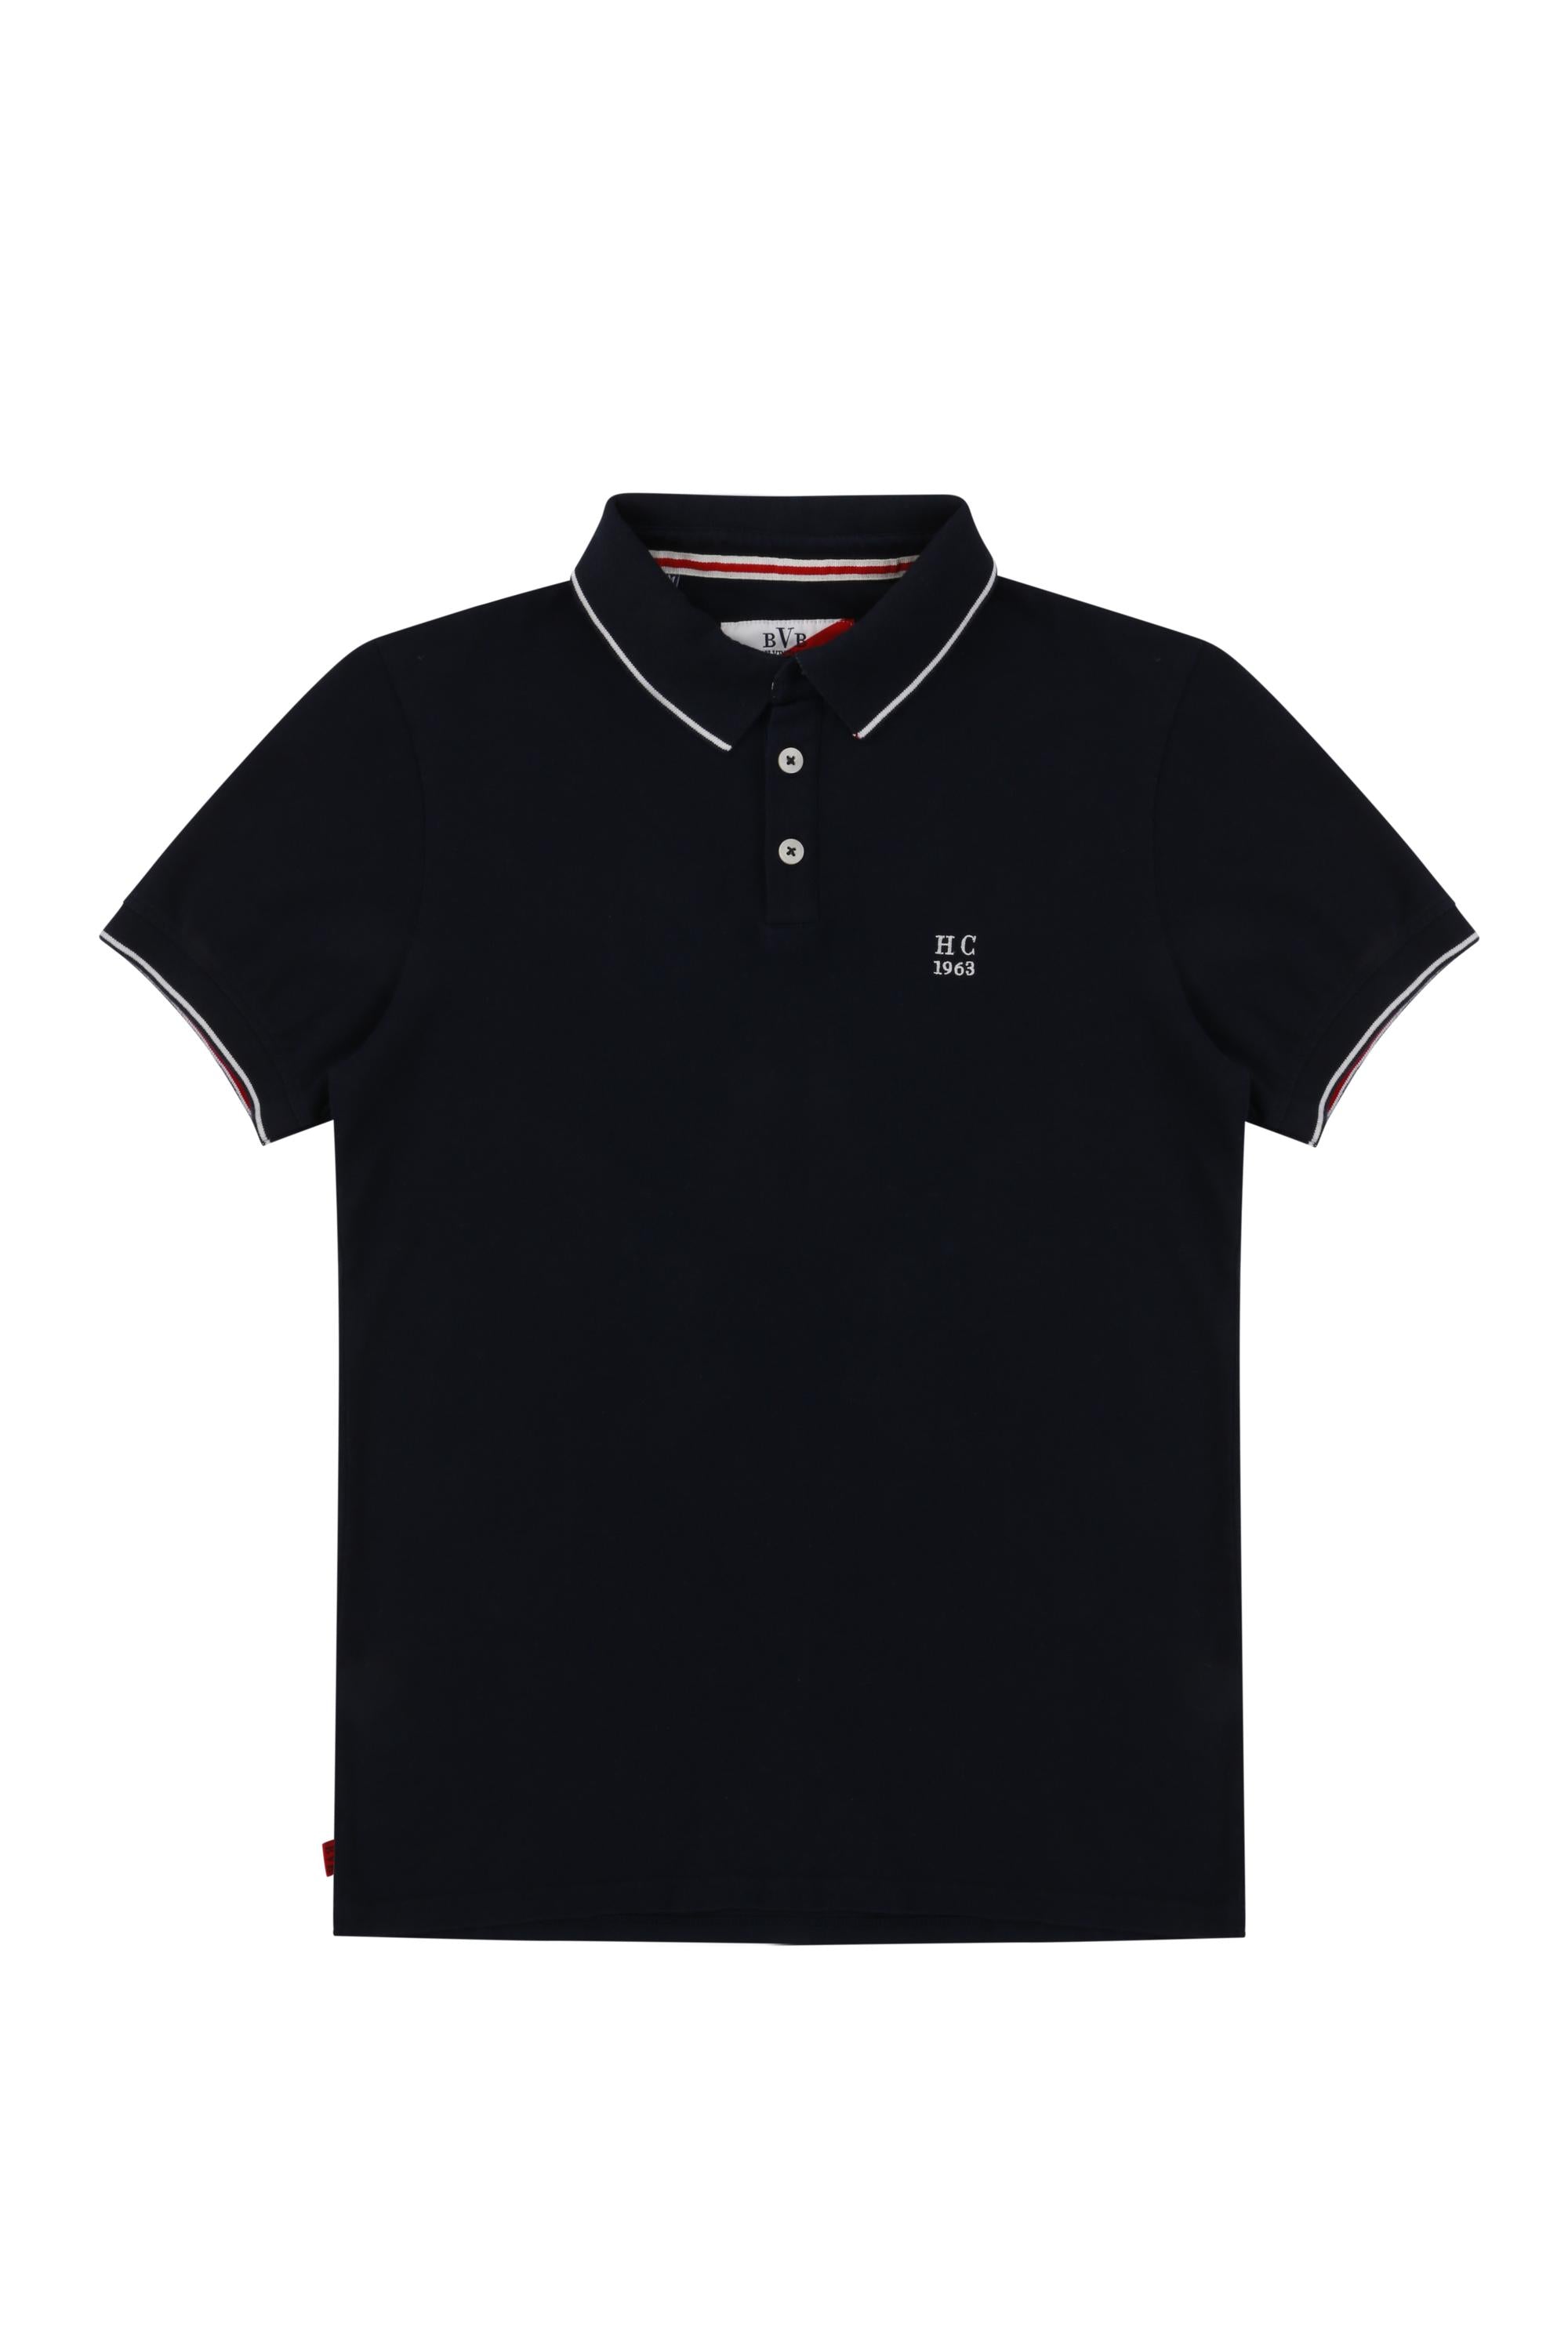 SIR HENRY COOPER SIGNATURE POLO-SHIRT